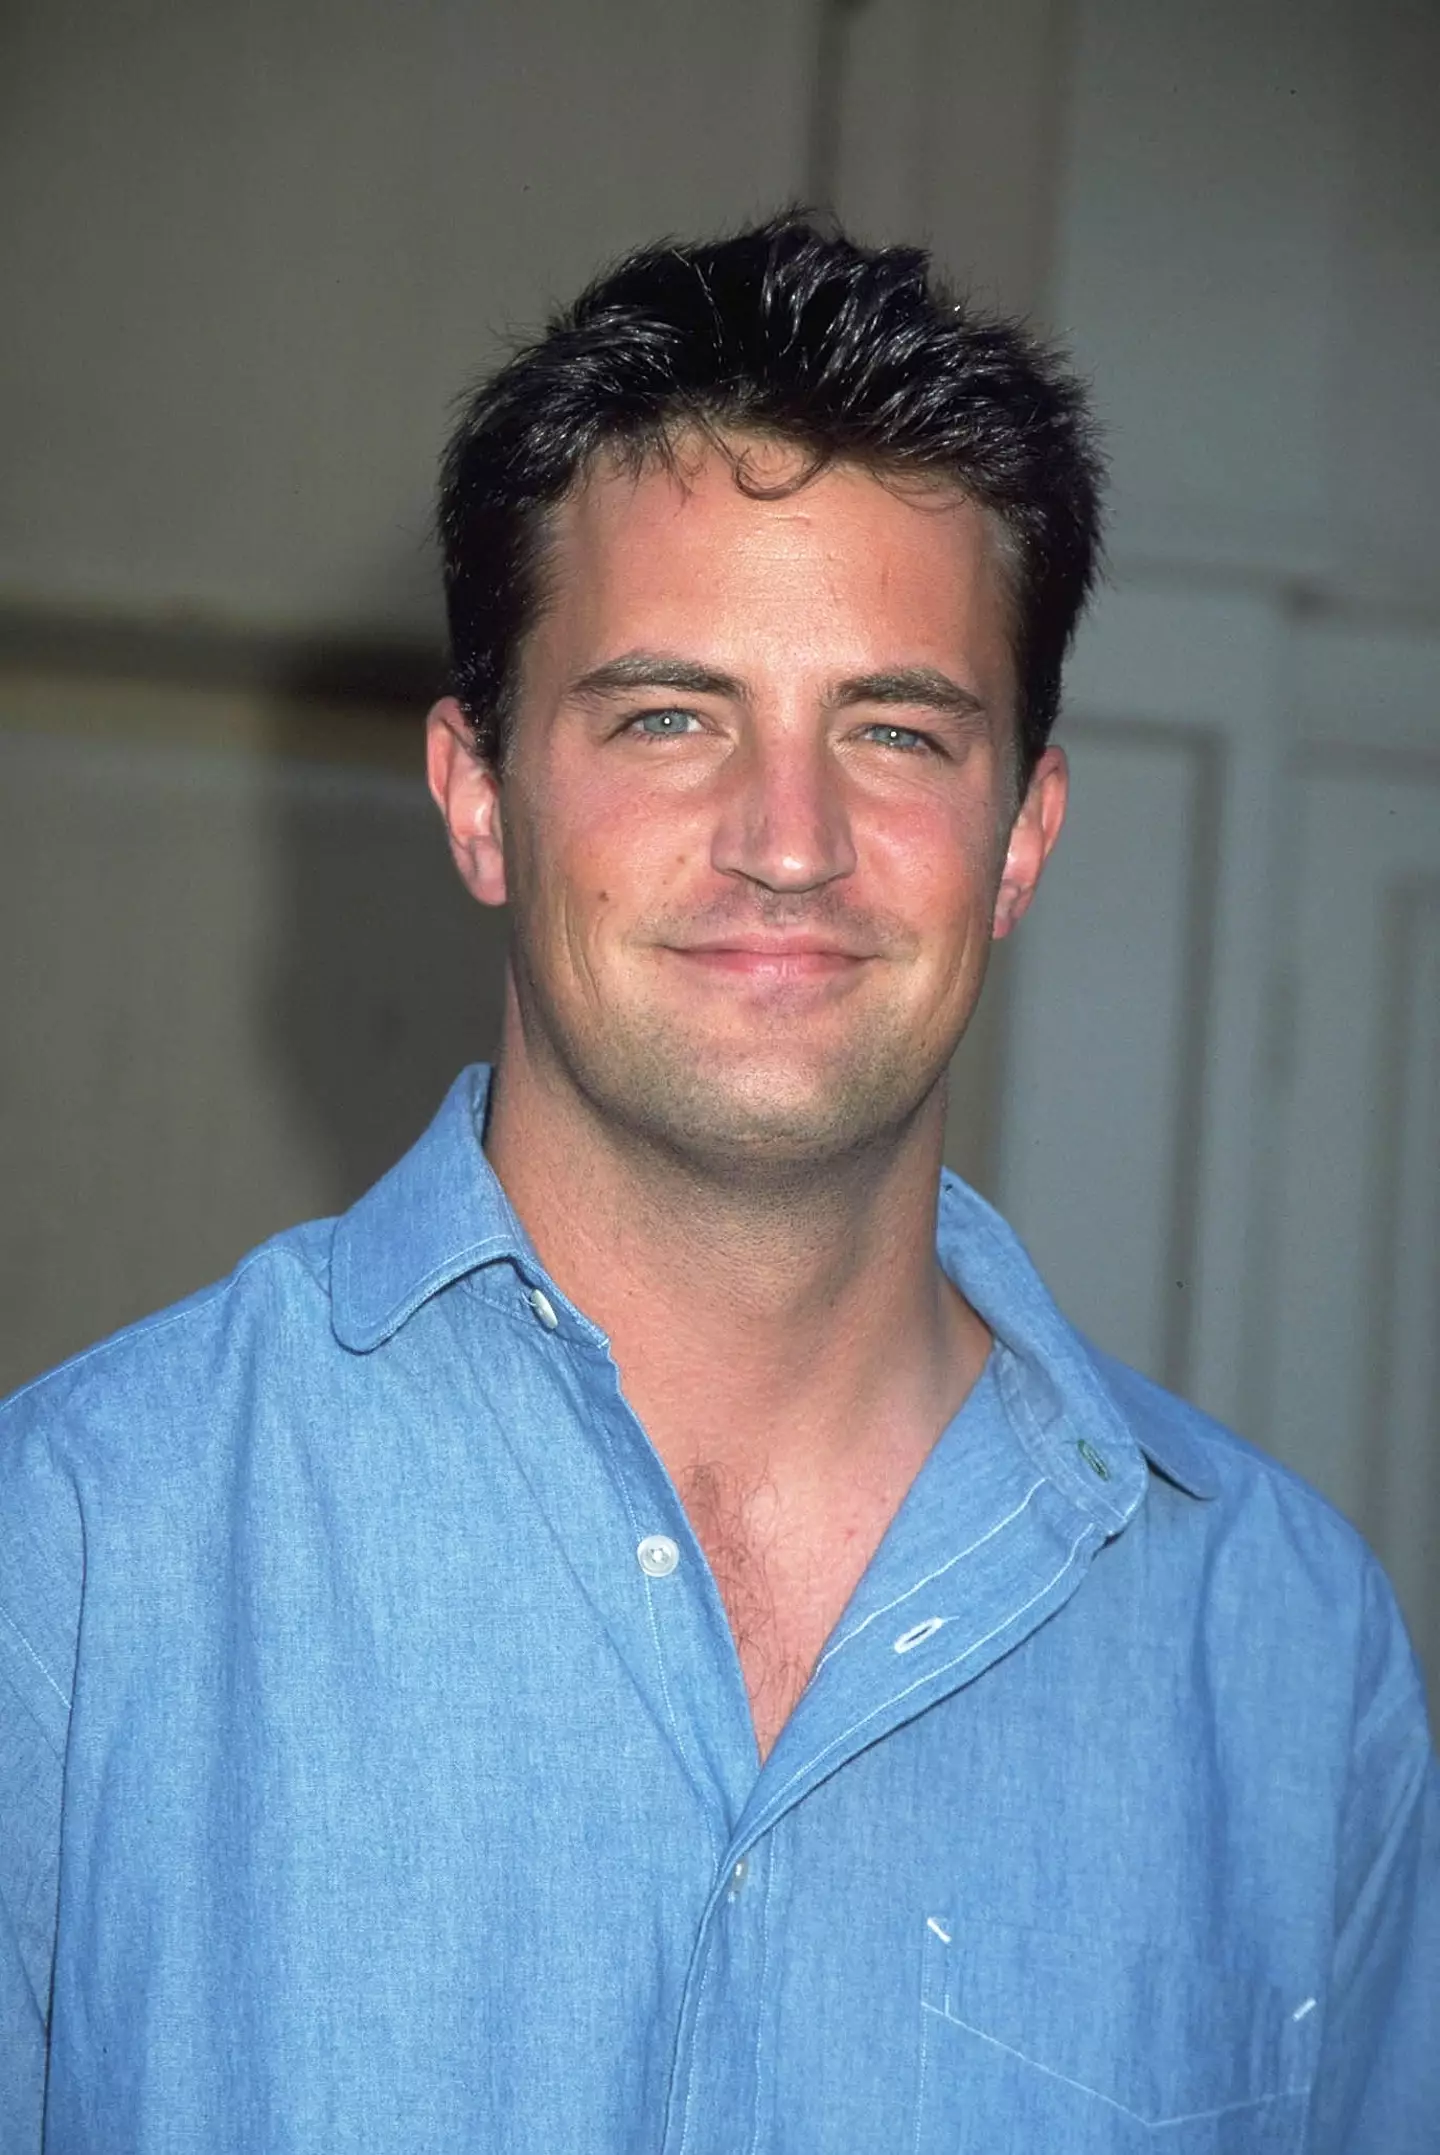 Matthew Perry was candid about his struggle with addiction.